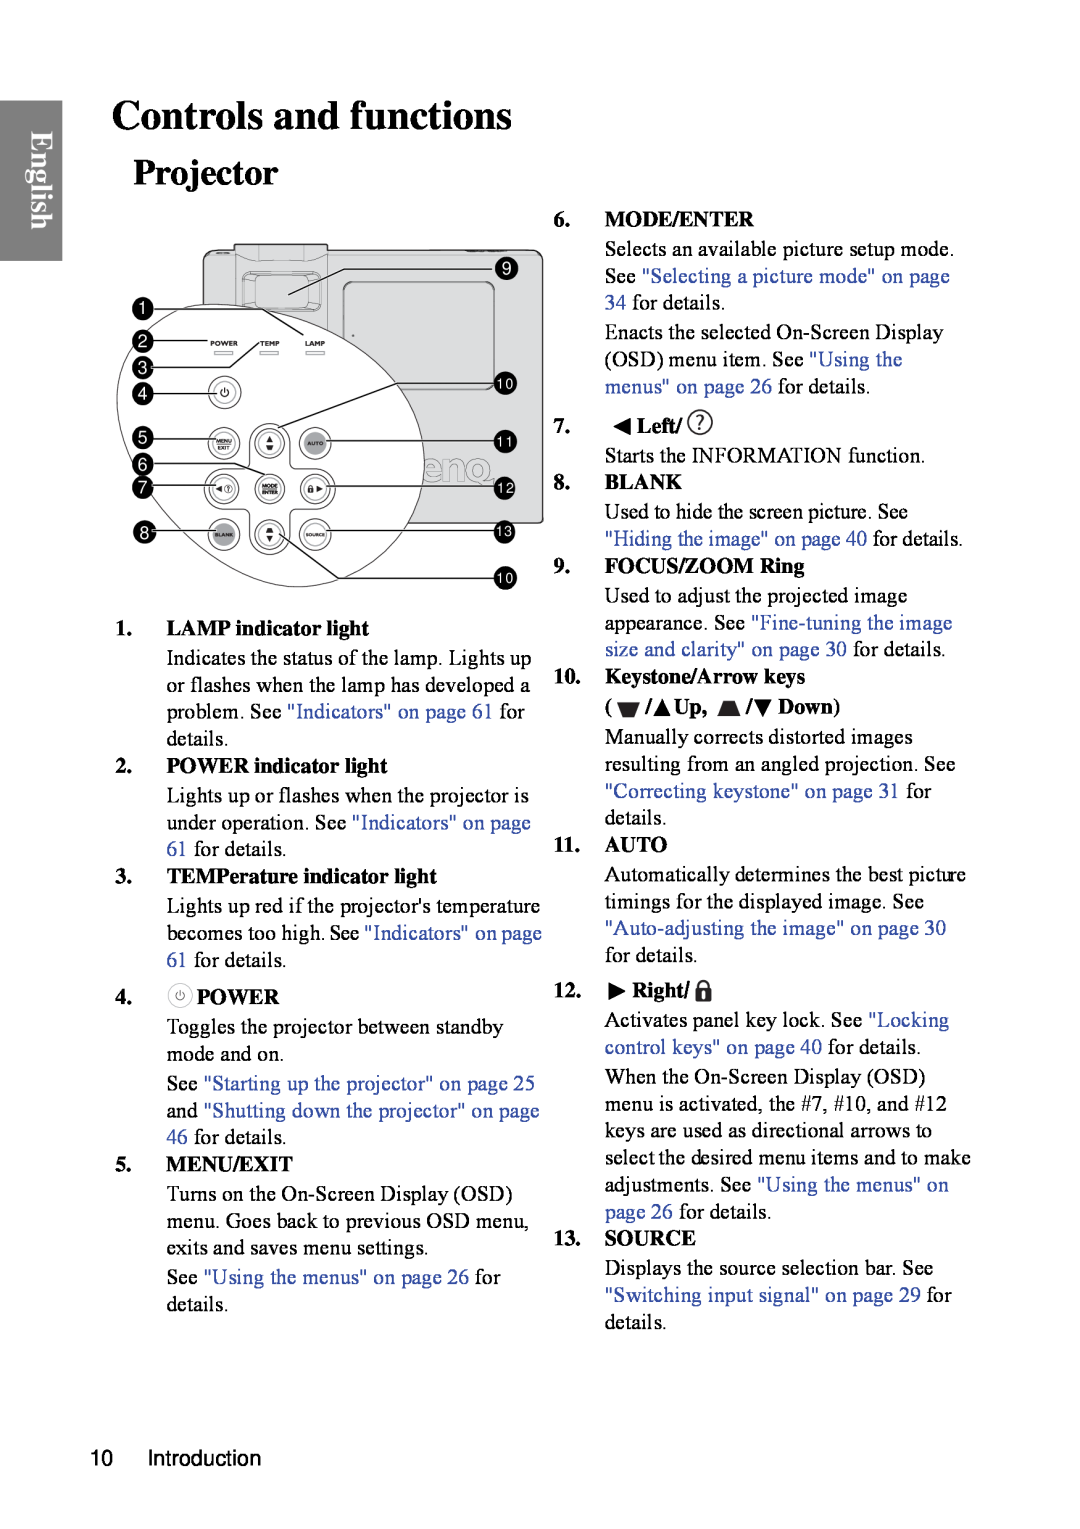 BenQ SP840 user manual Controls and functions, Projector, English, See Using the menus on page 26 for details 